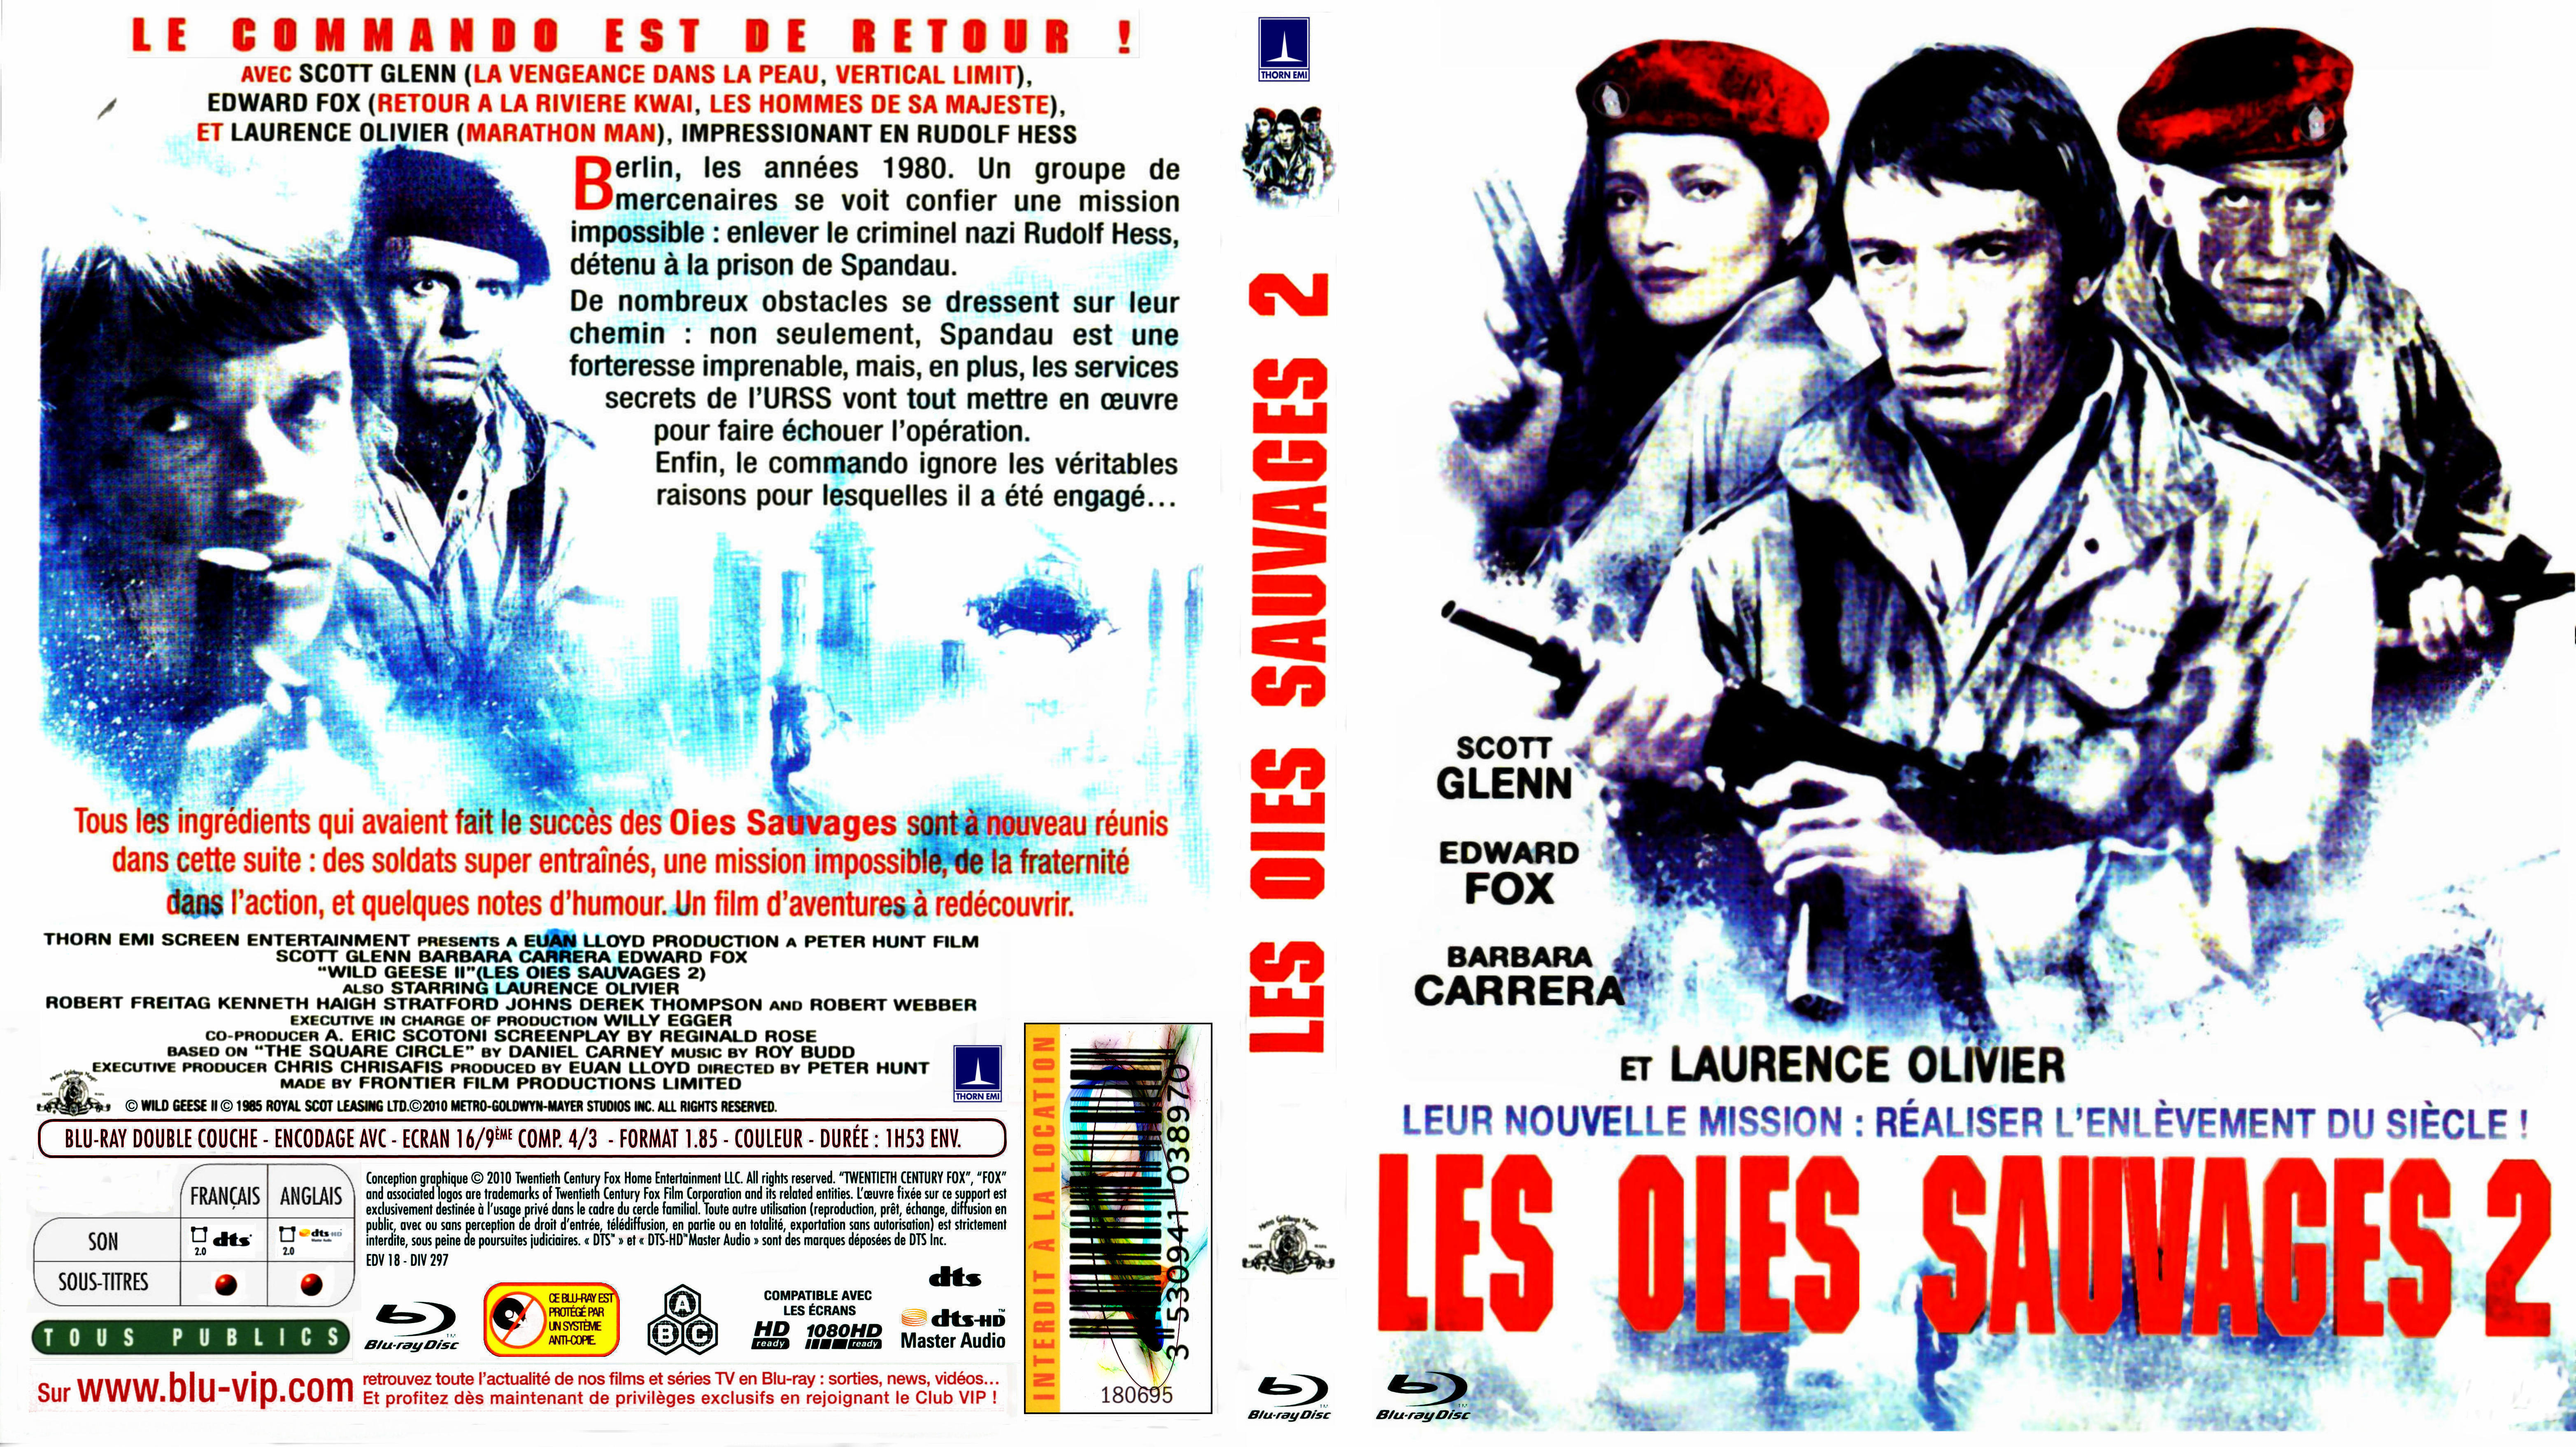 Jaquette DVD Les oies sauvages 2 custom (BLU-RAY)